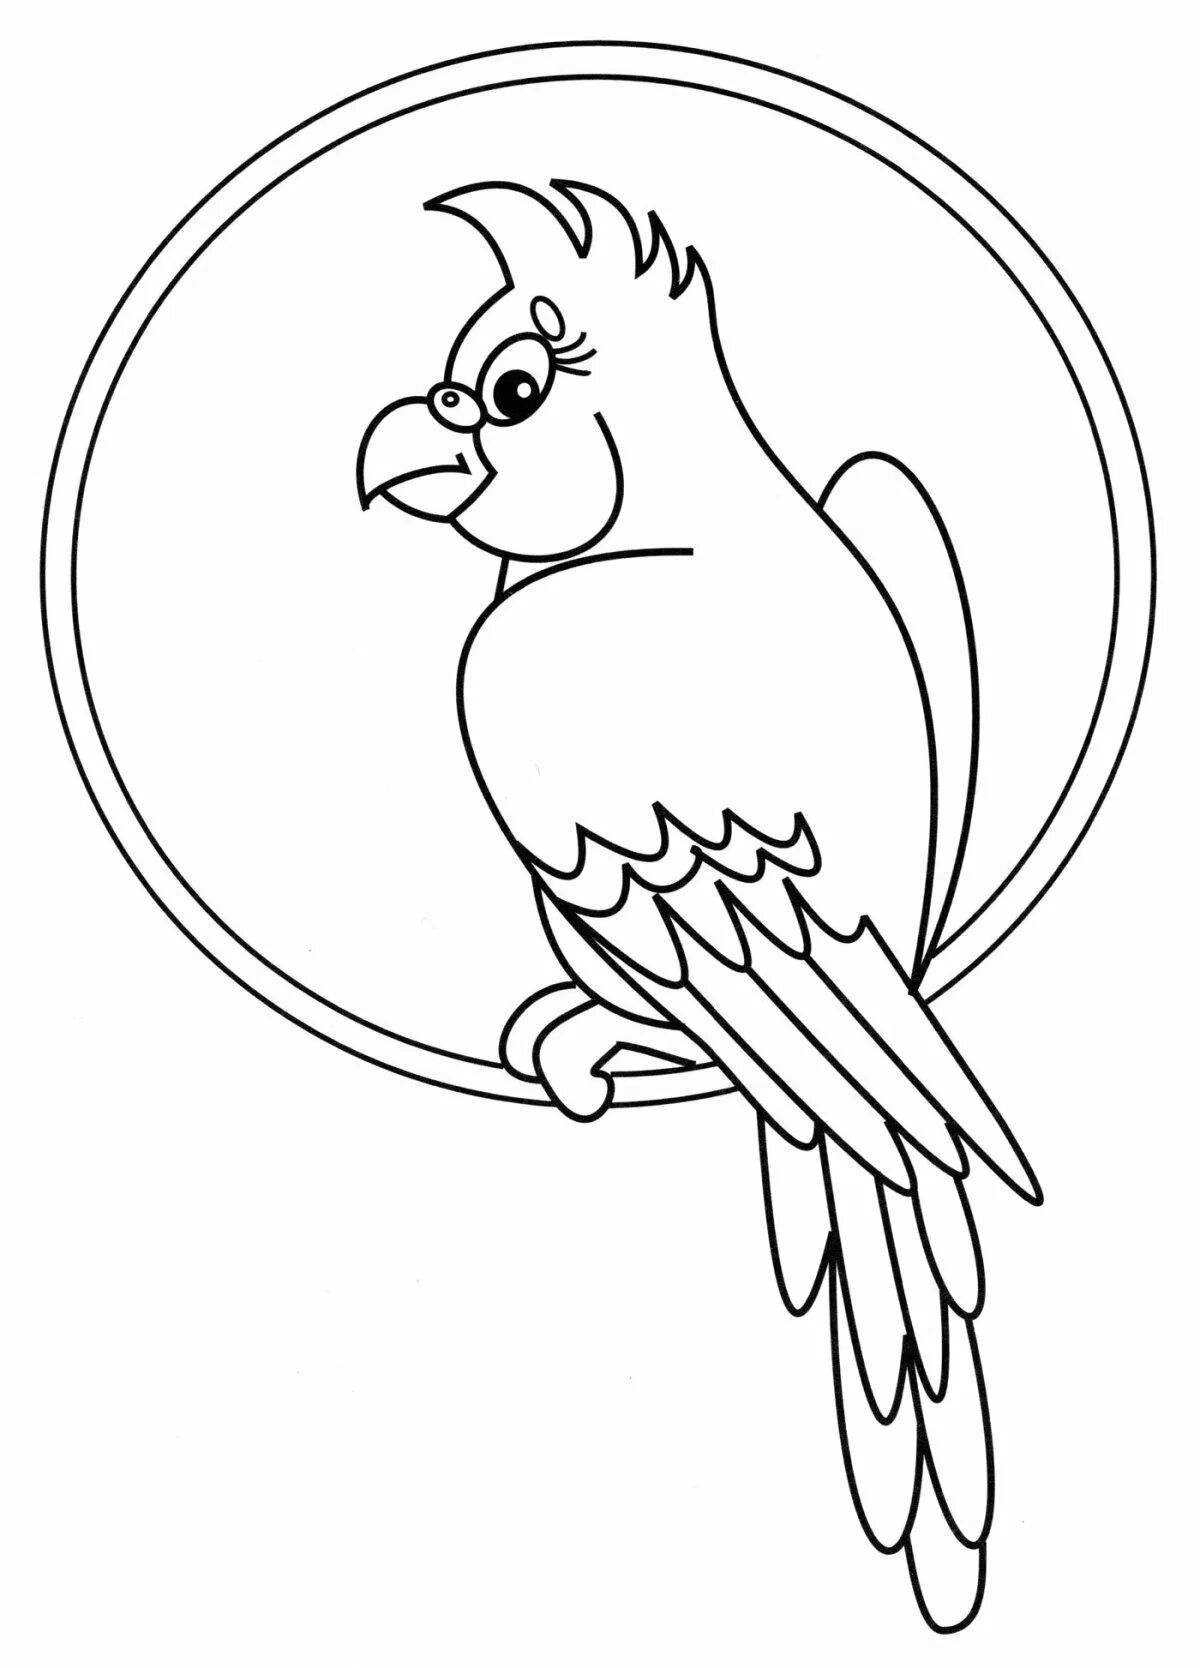 Fun coloring parrot for kids